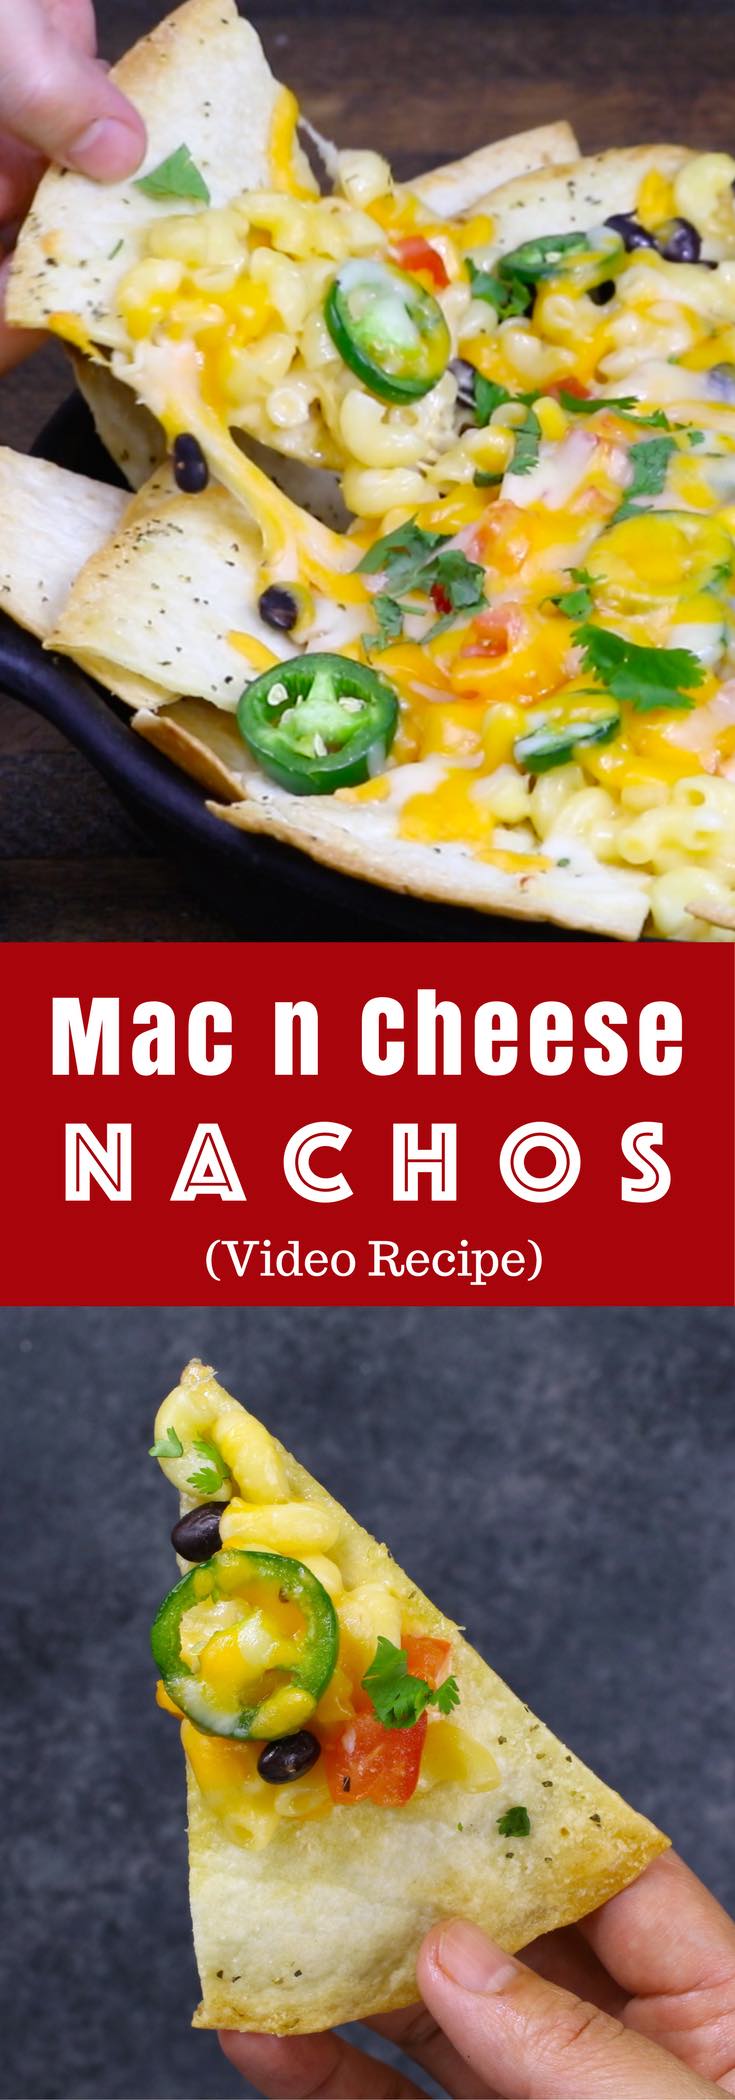 Mac and Cheese Nachos – Soft and creamy Mac & Cheese is balanced with crispy nachos, making perfect finger food for any party! So good! Video recipe. | Tipbuzz.com